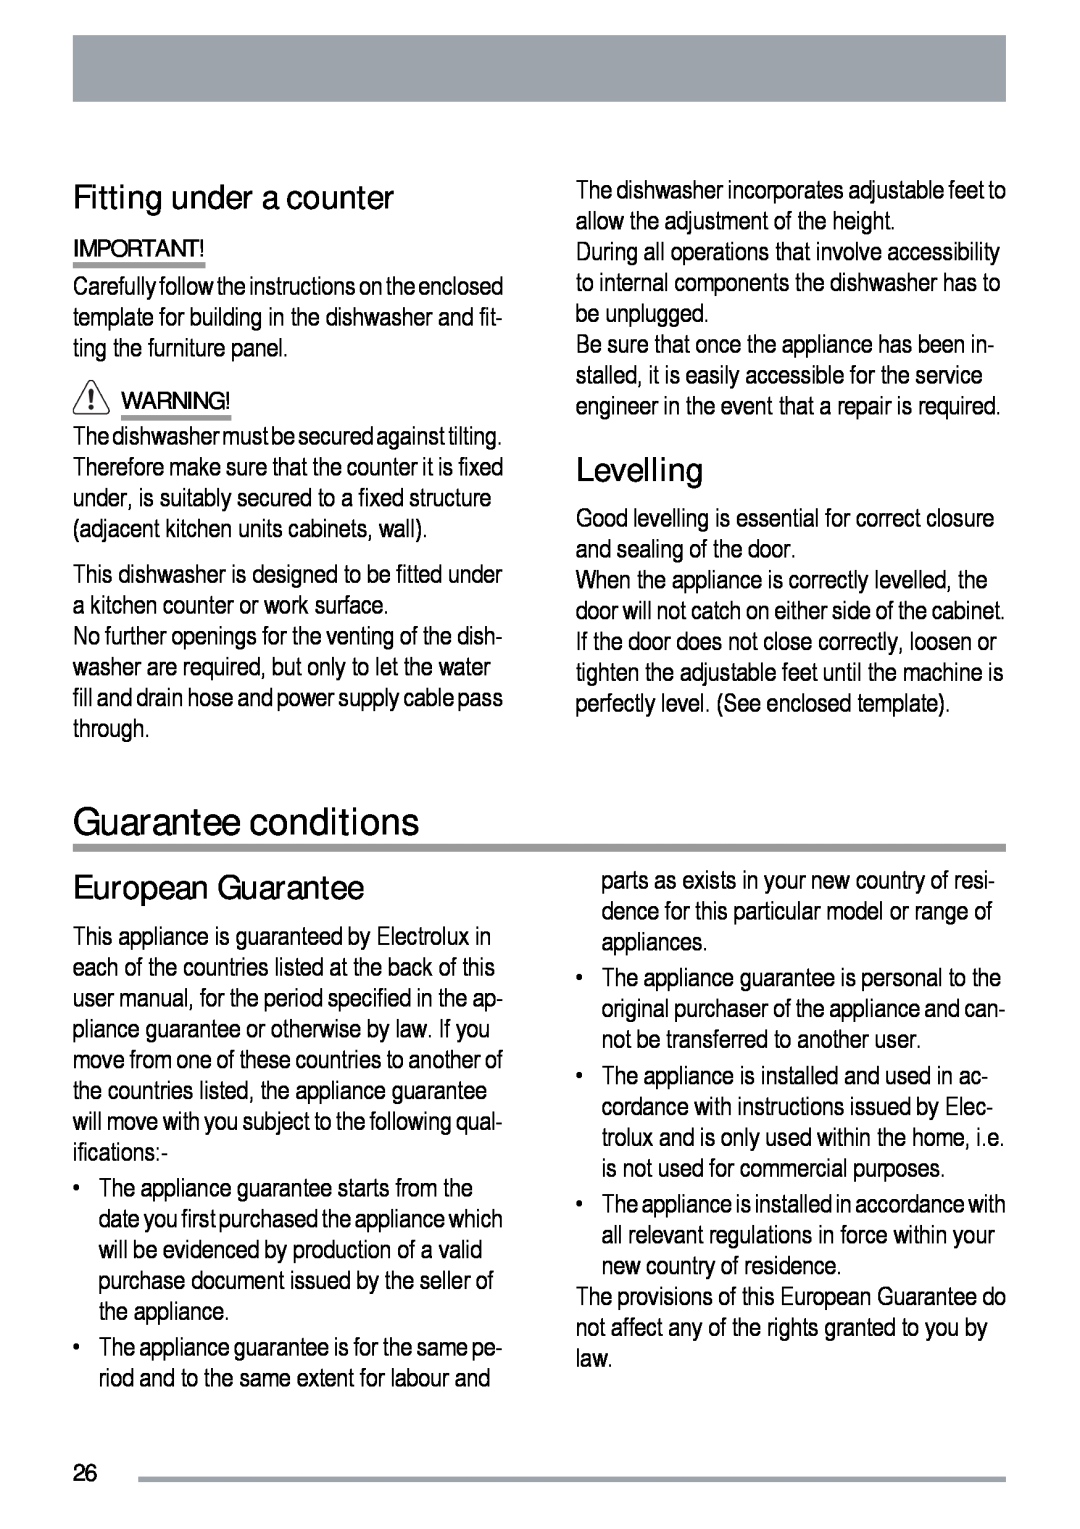 Zanussi ZDT 6454 user manual Guarantee conditions, Fitting under a counter, Levelling, European Guarantee 